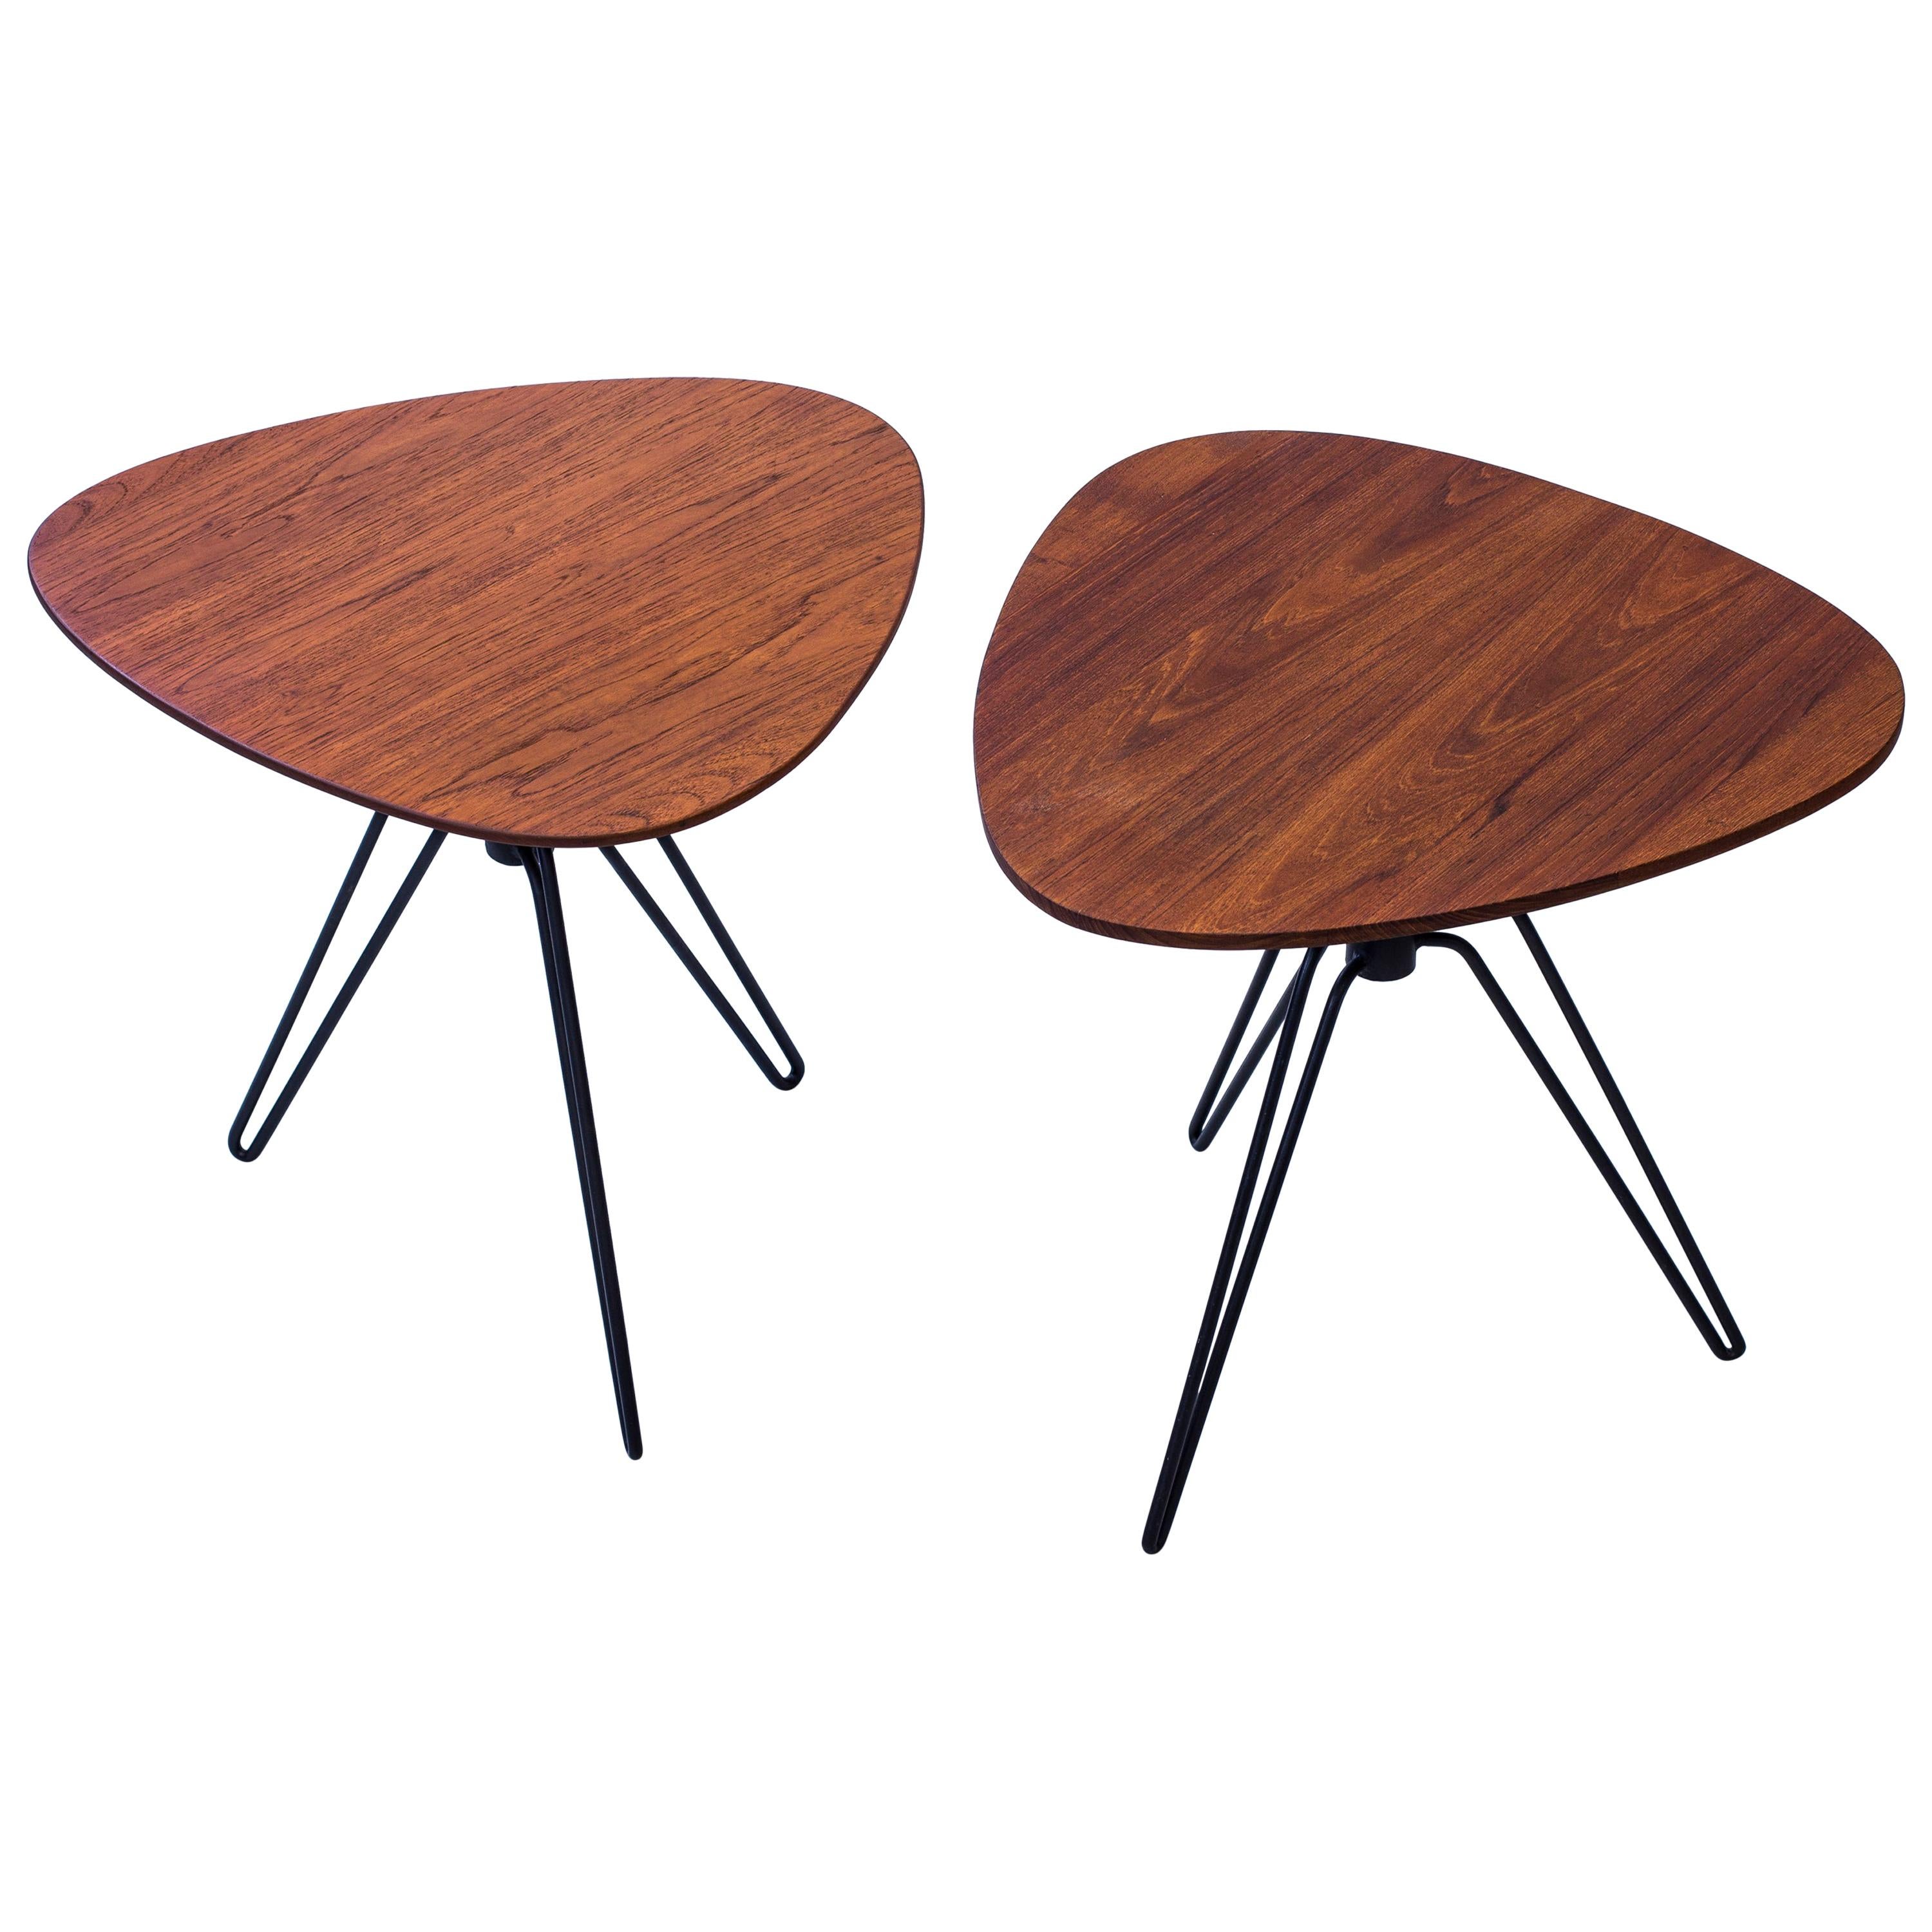 Pair of Side Tables by Hans Agne Jakobsson, Sweden, 1950s